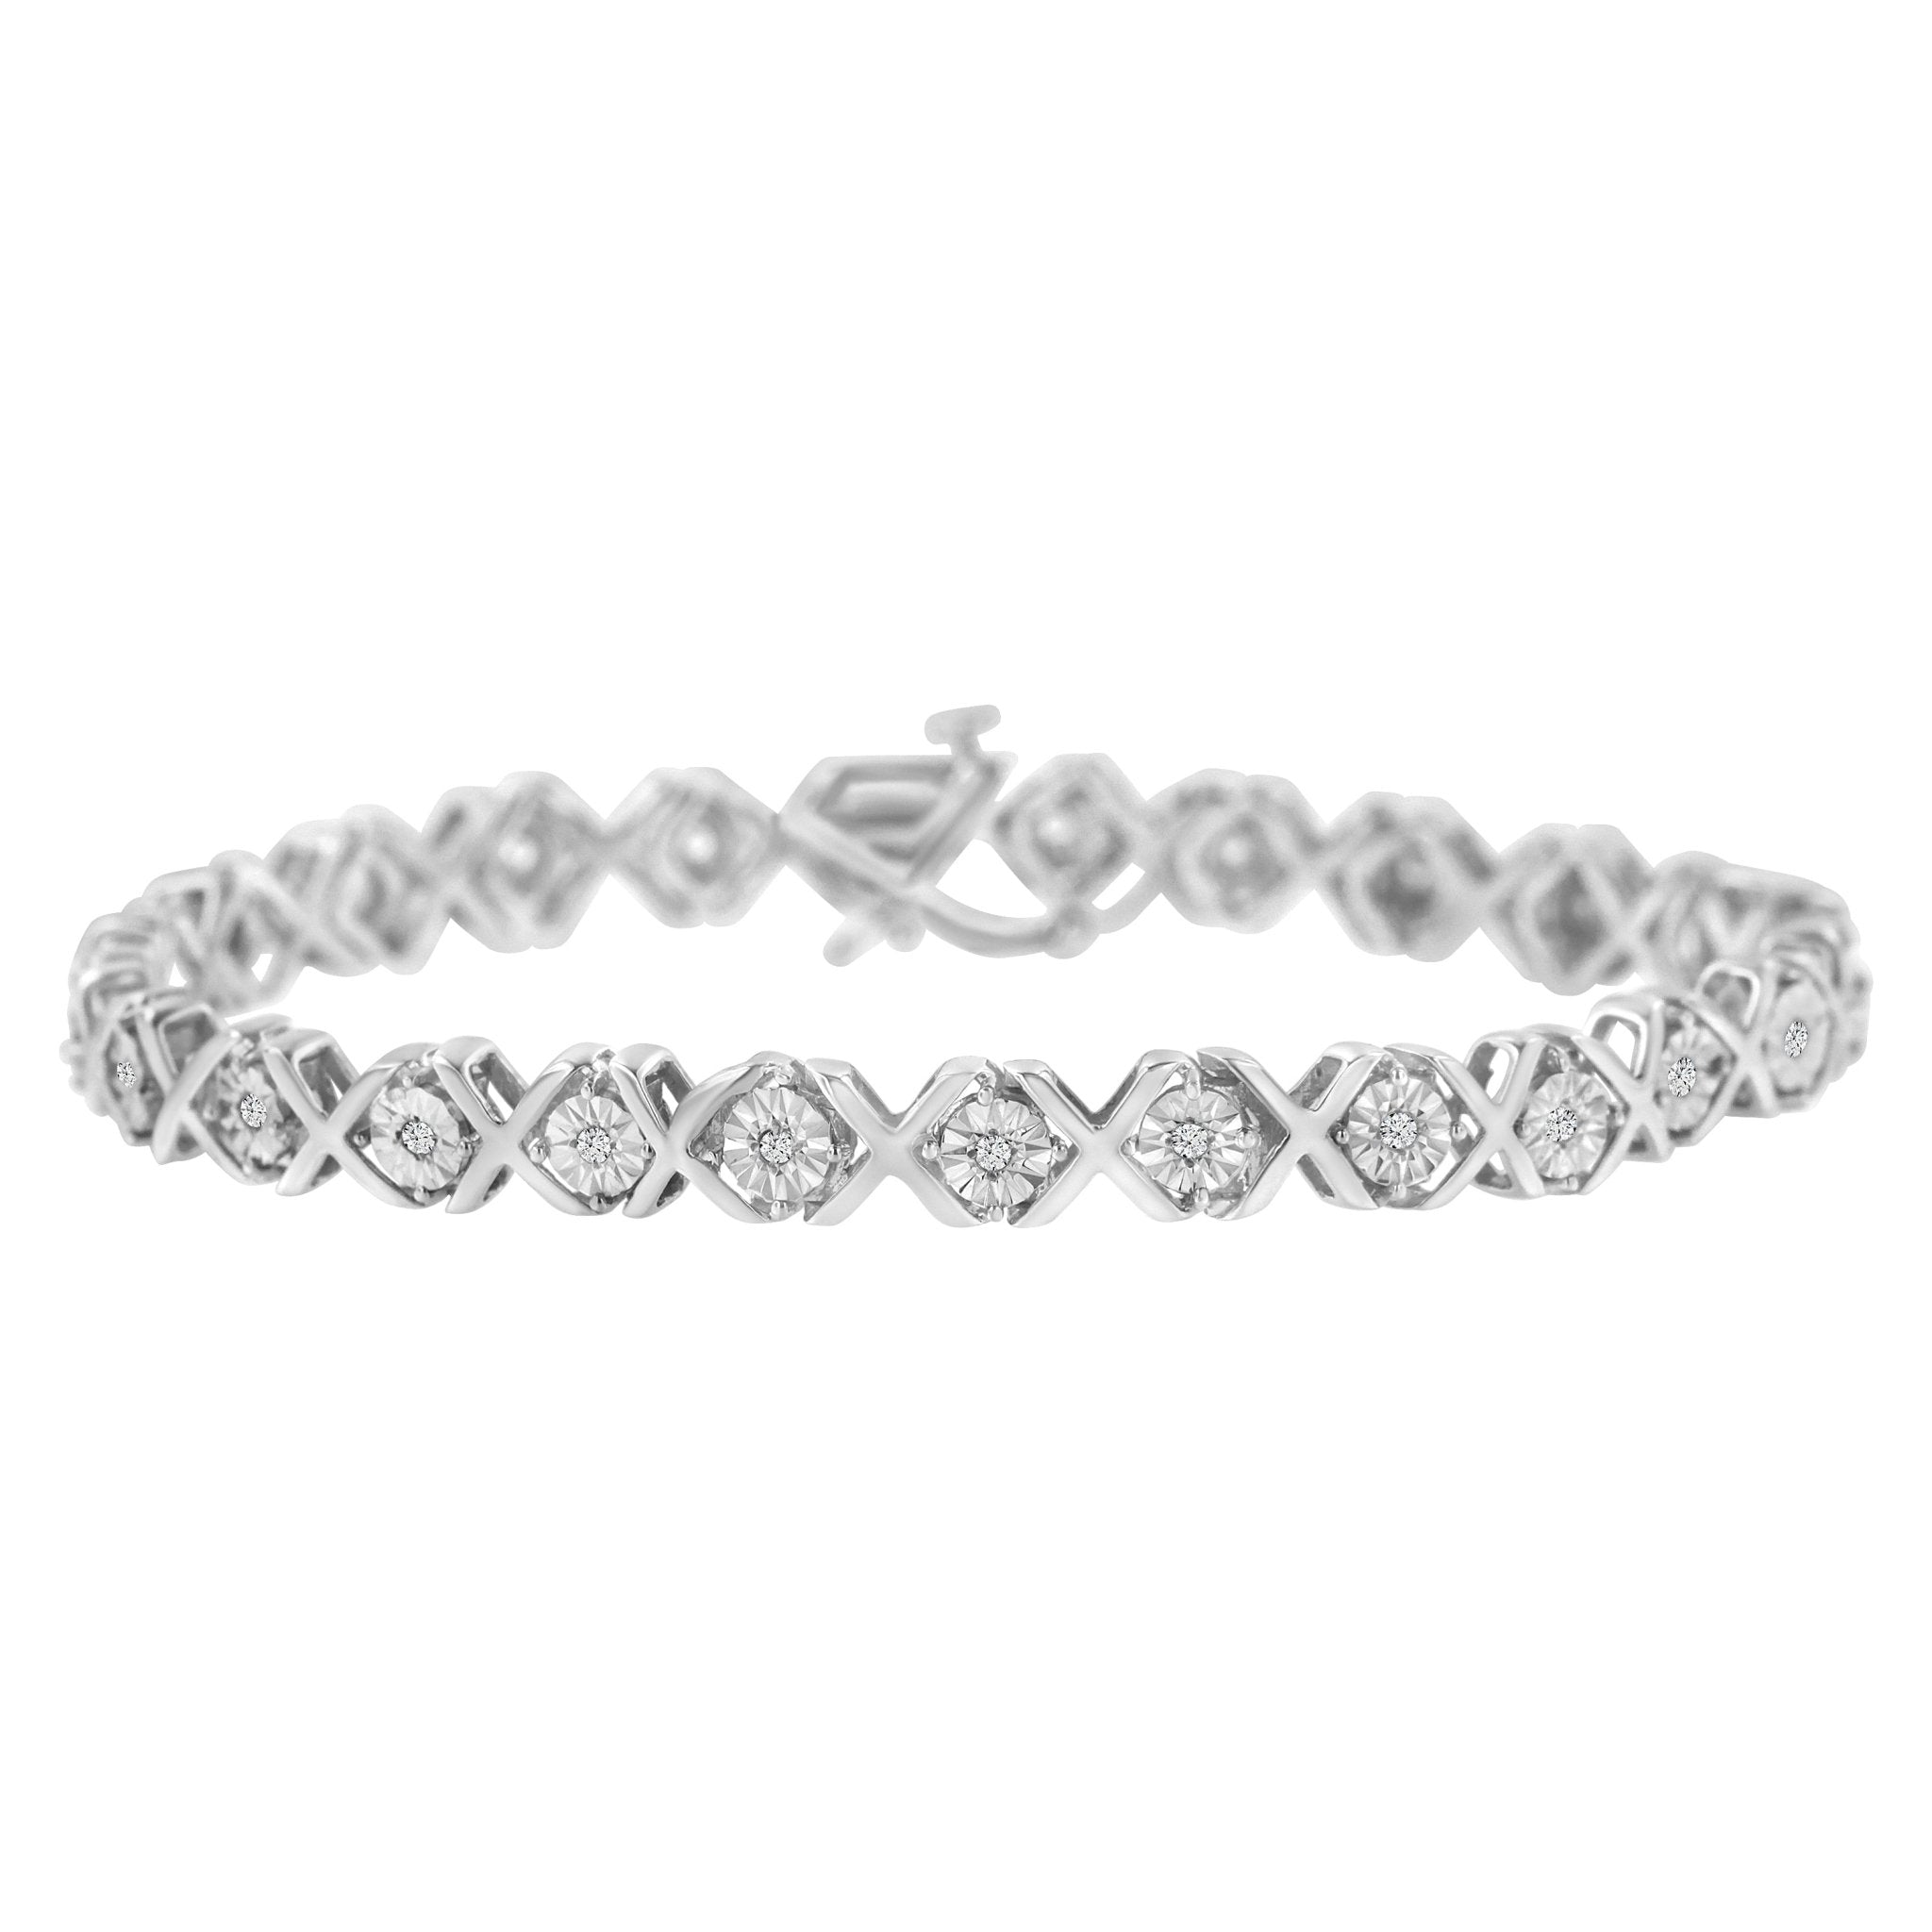 .925 Sterling Silver 1/4 Cttw Miracle-Set Round Cut Diamond "X" Link Bracelet (I-J Color, I3 Clarity) - Size 7.25" - Tuesday Morning-Bracelets